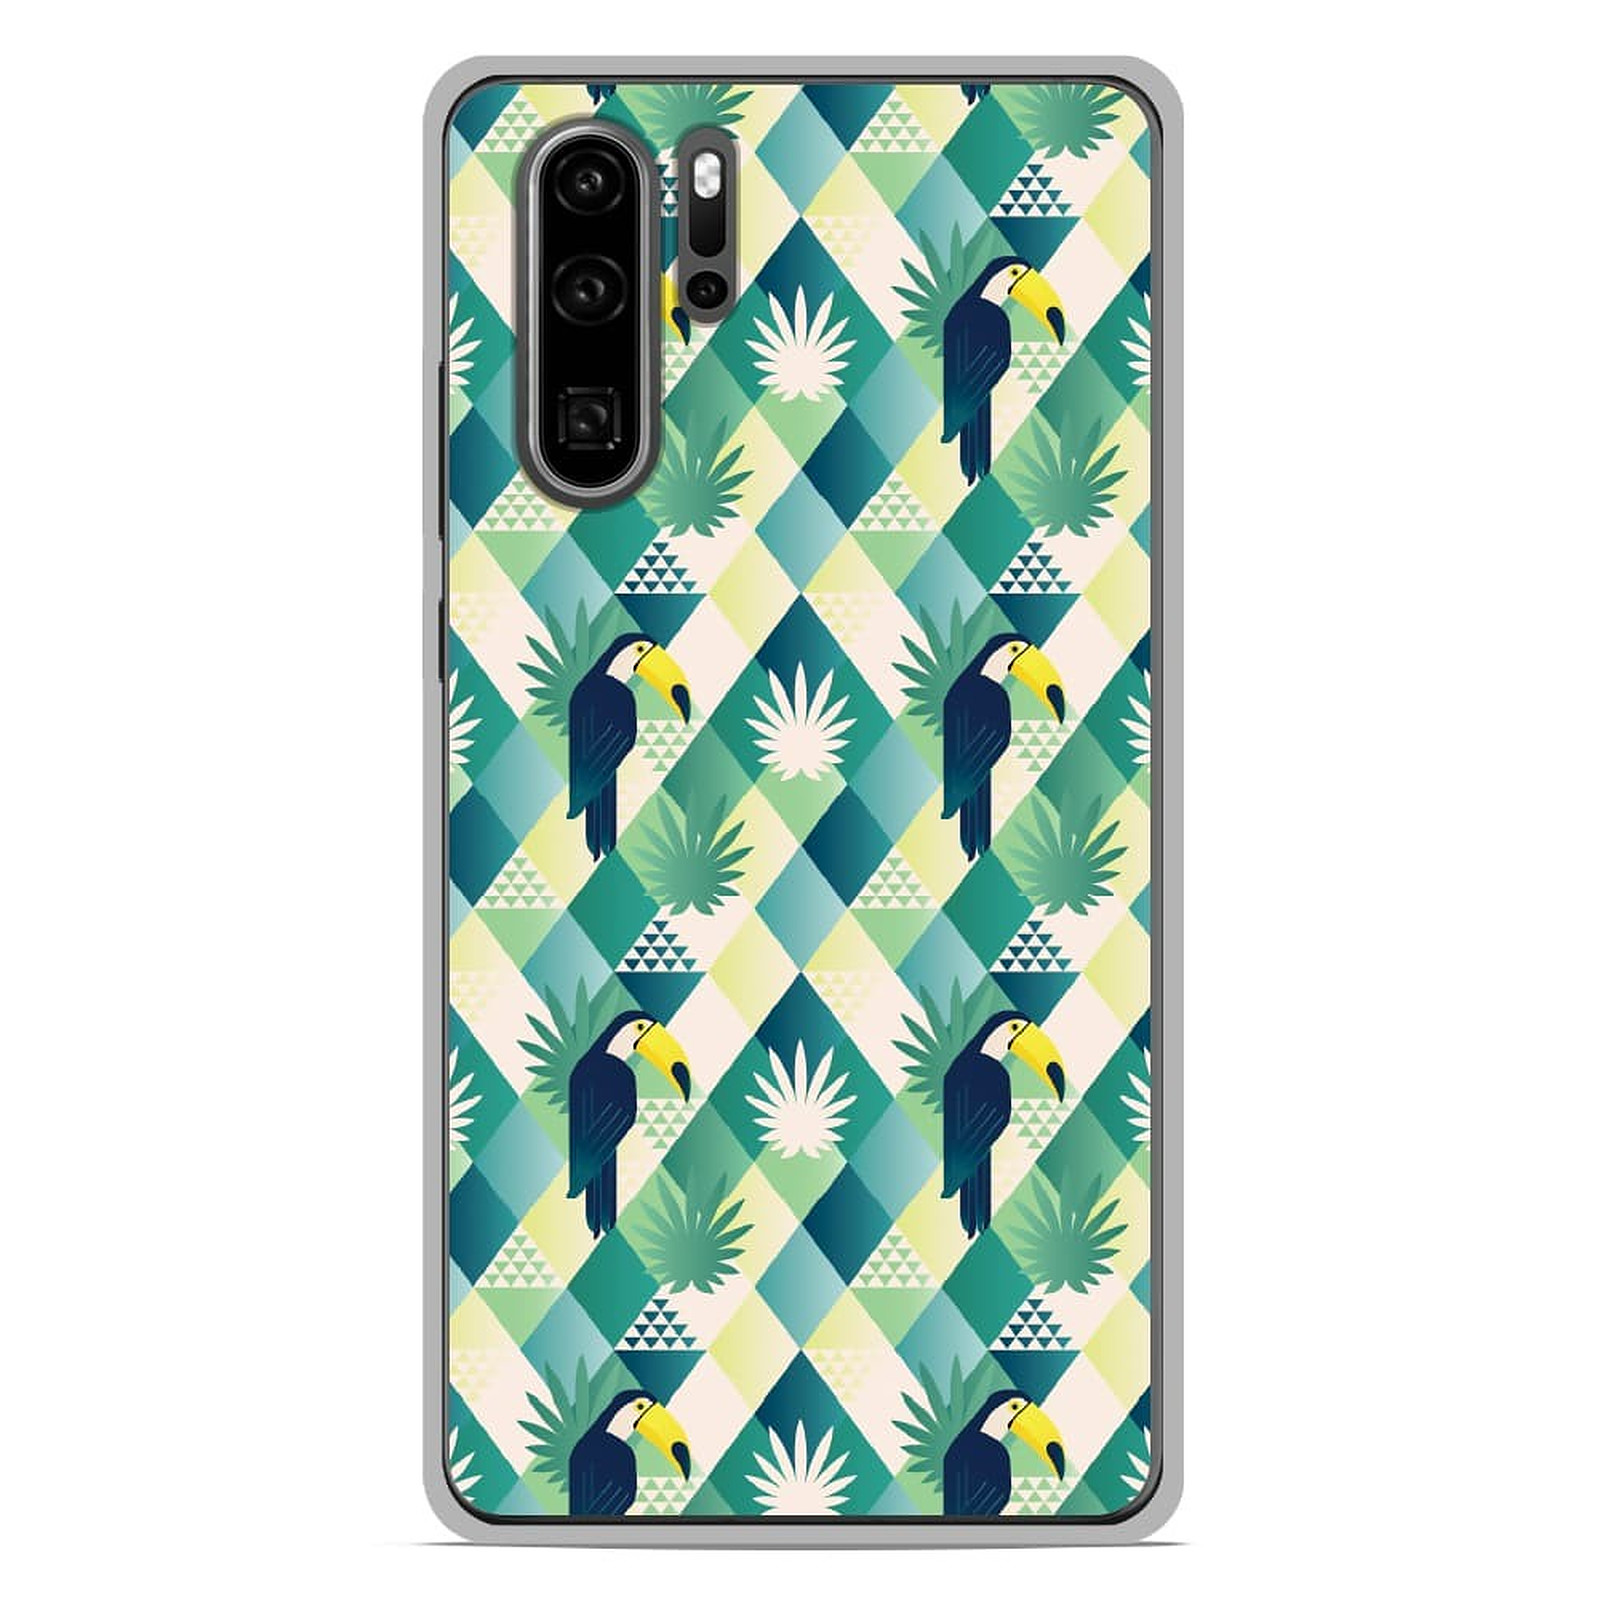 1001 Coques Coque silicone gel Huawei P30 Pro motif Toucan losange - Coque telephone 1001Coques